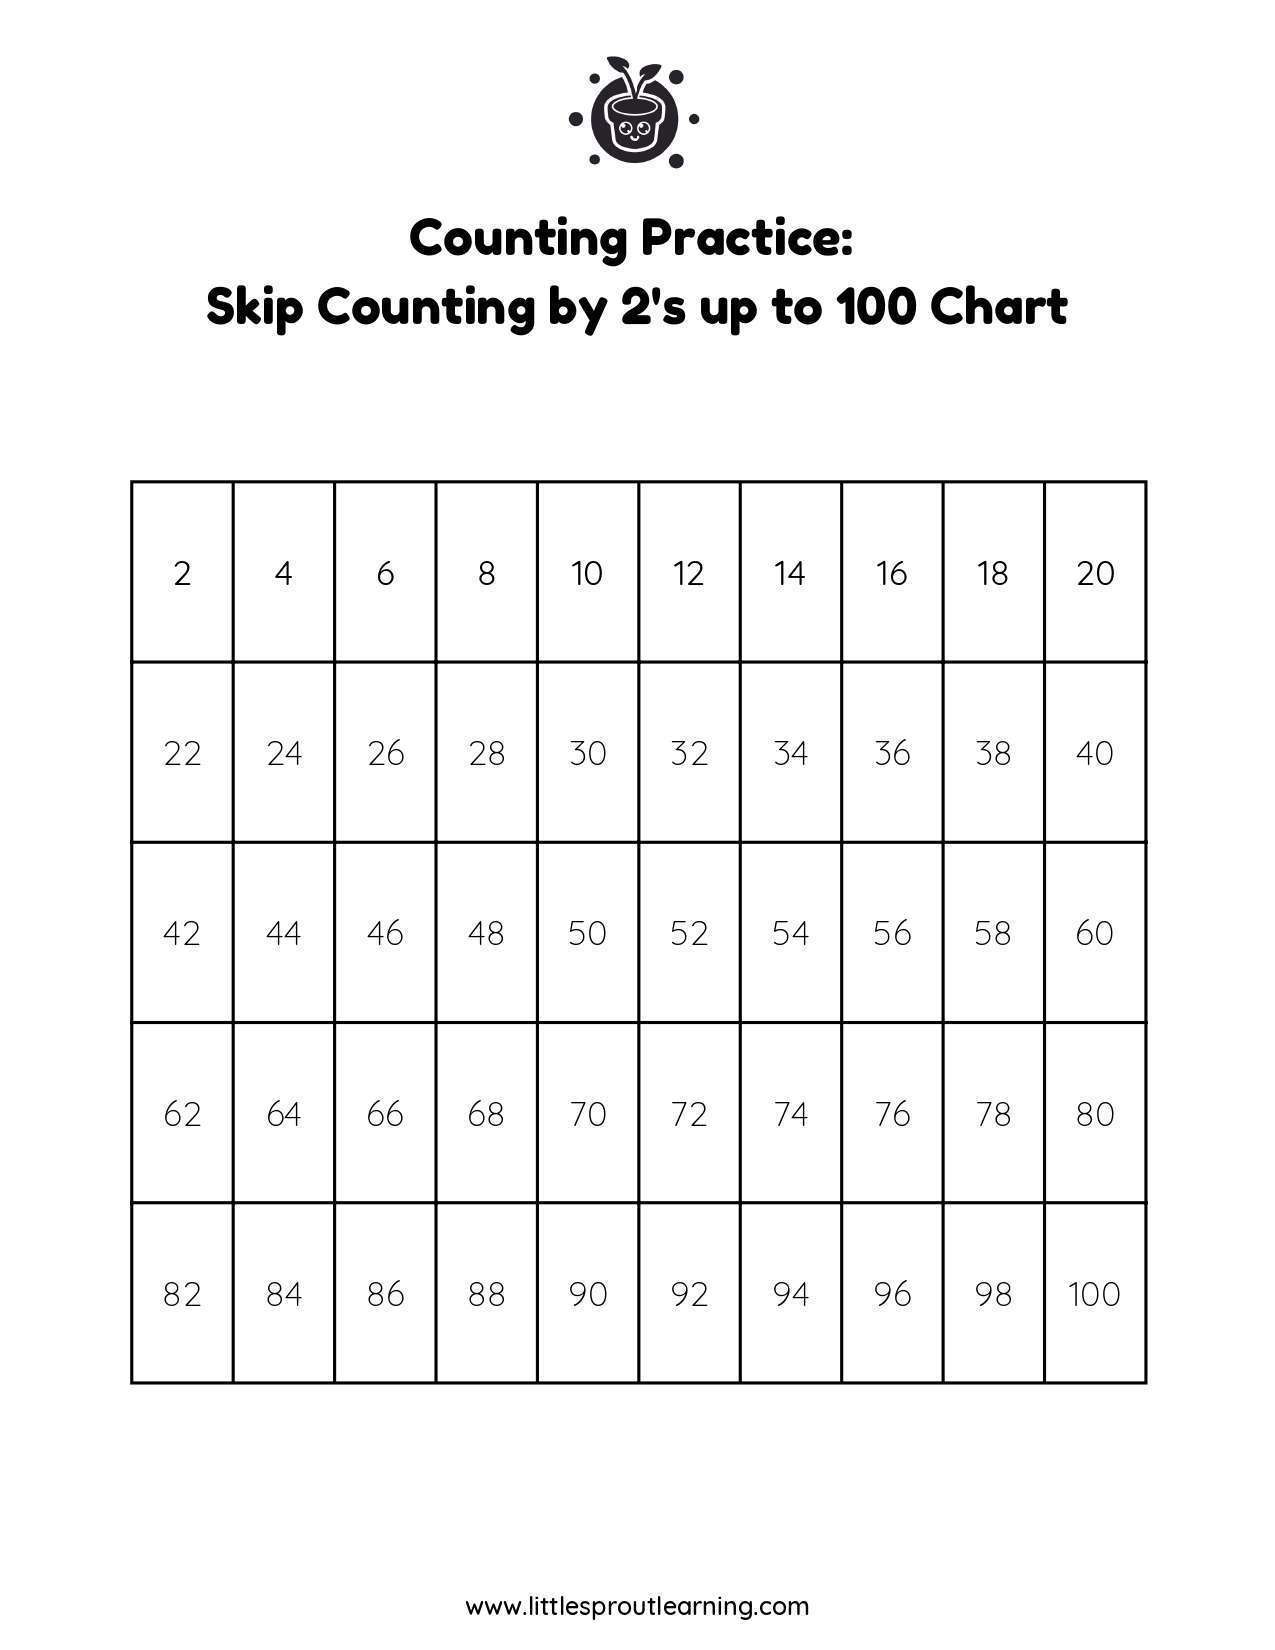 Skip Counting by 2 up to 100 Full Chart